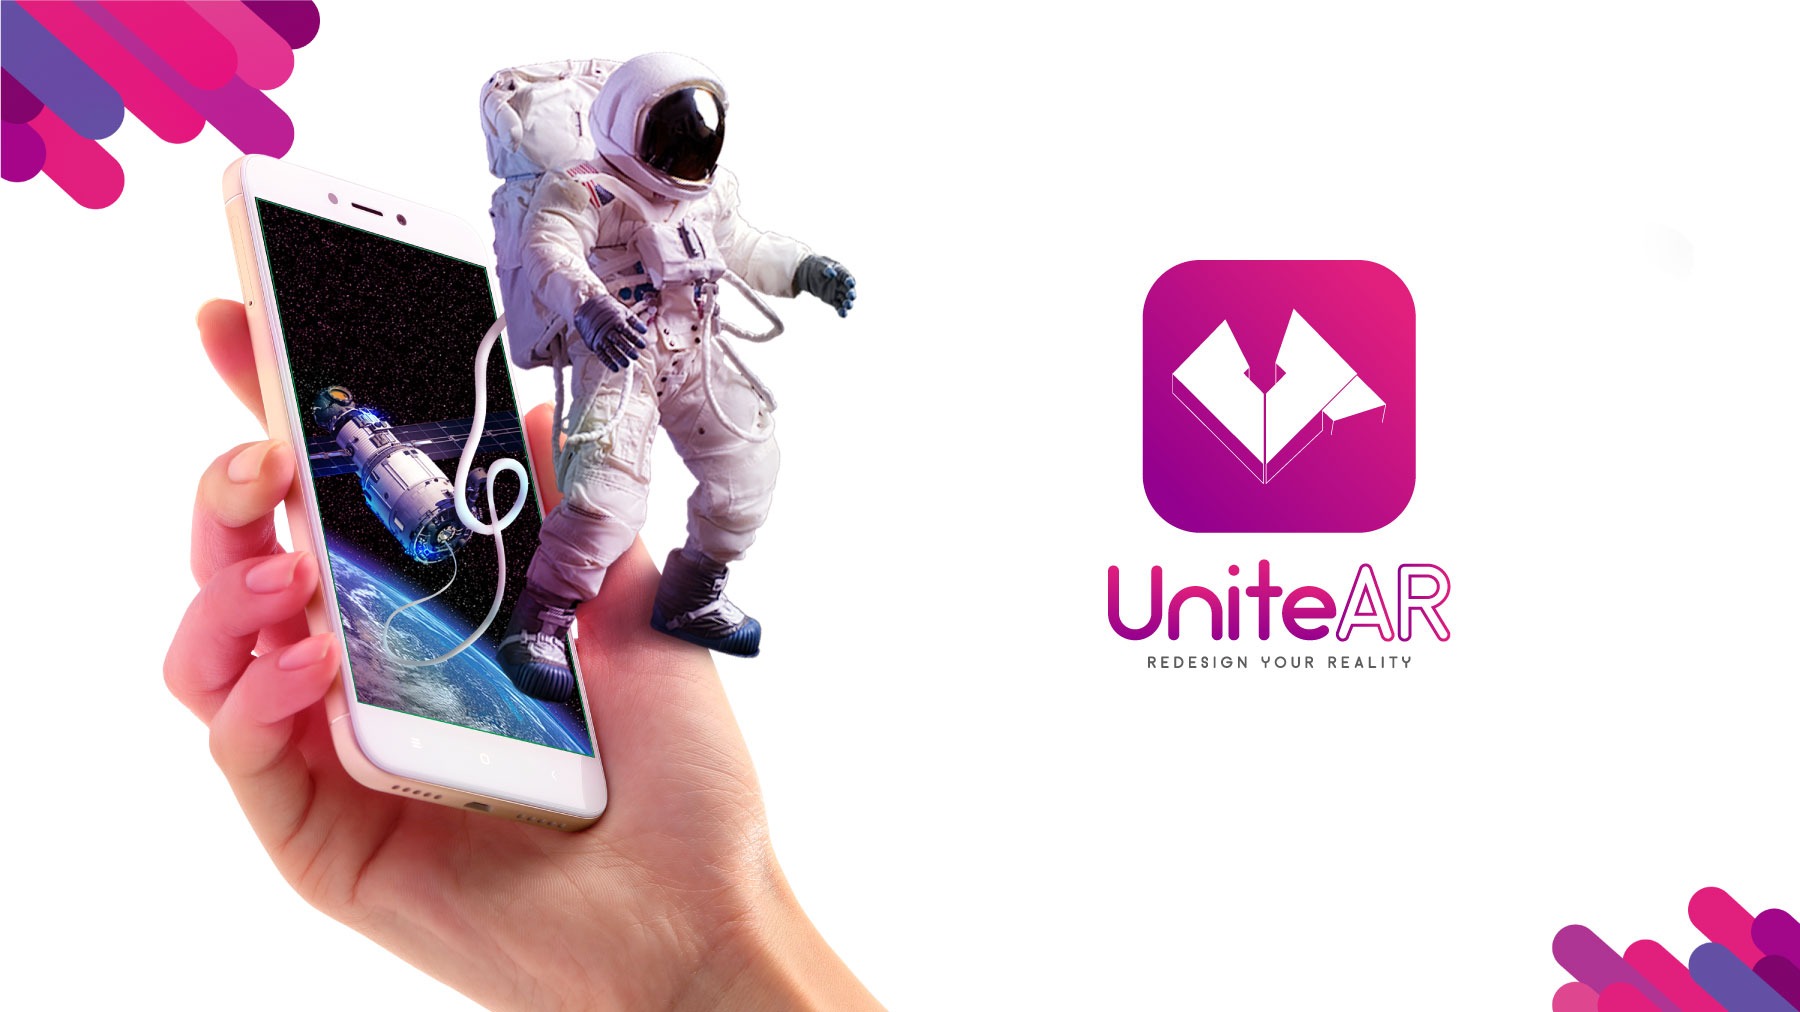 Unitear, a no code augmented reality app and content creator
                       